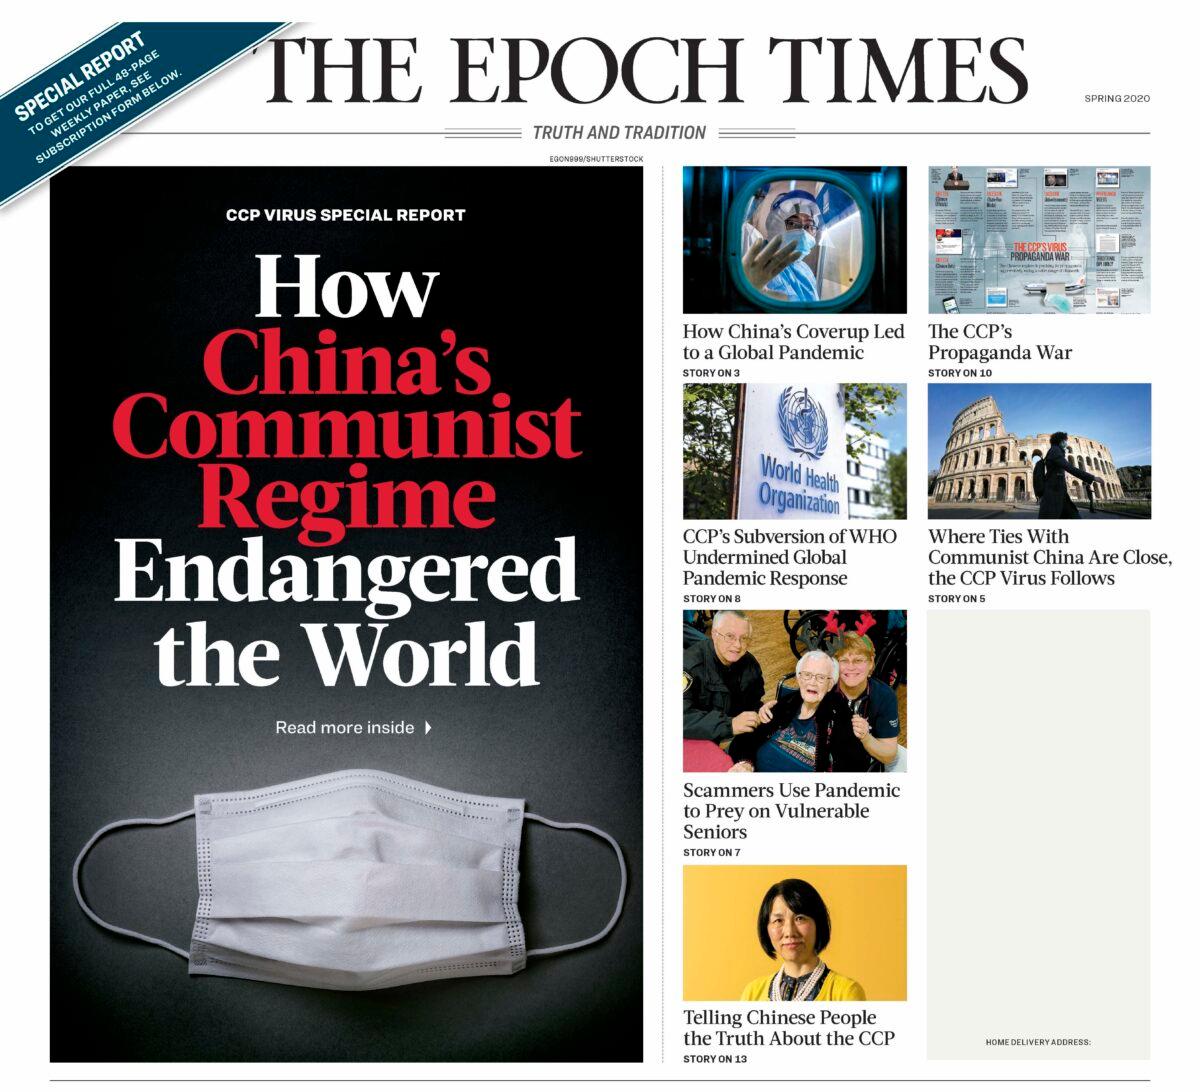 The front page of the special edition by The Epoch Times on the coronavirus pandemic. (Screenshot/The Epoch Times)